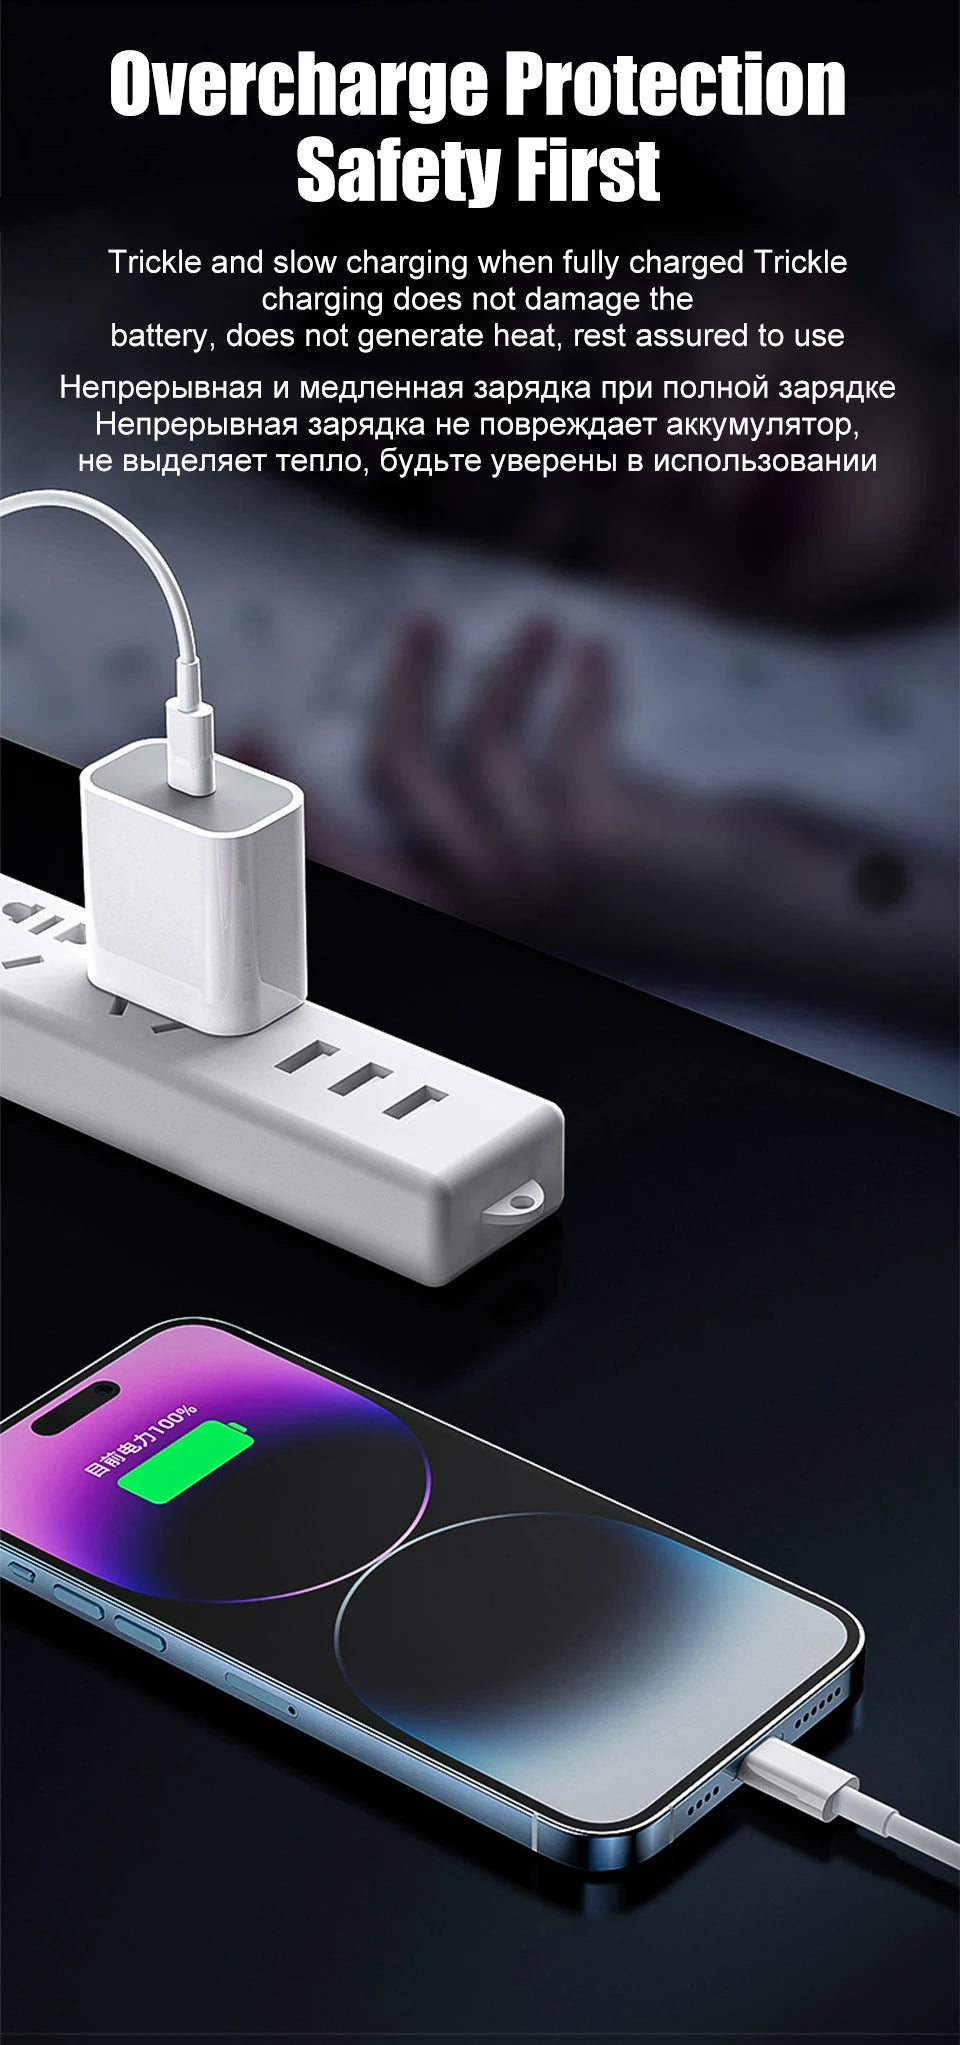 20W PD Fast Charge USB-C to Lightning Cable for iPhone